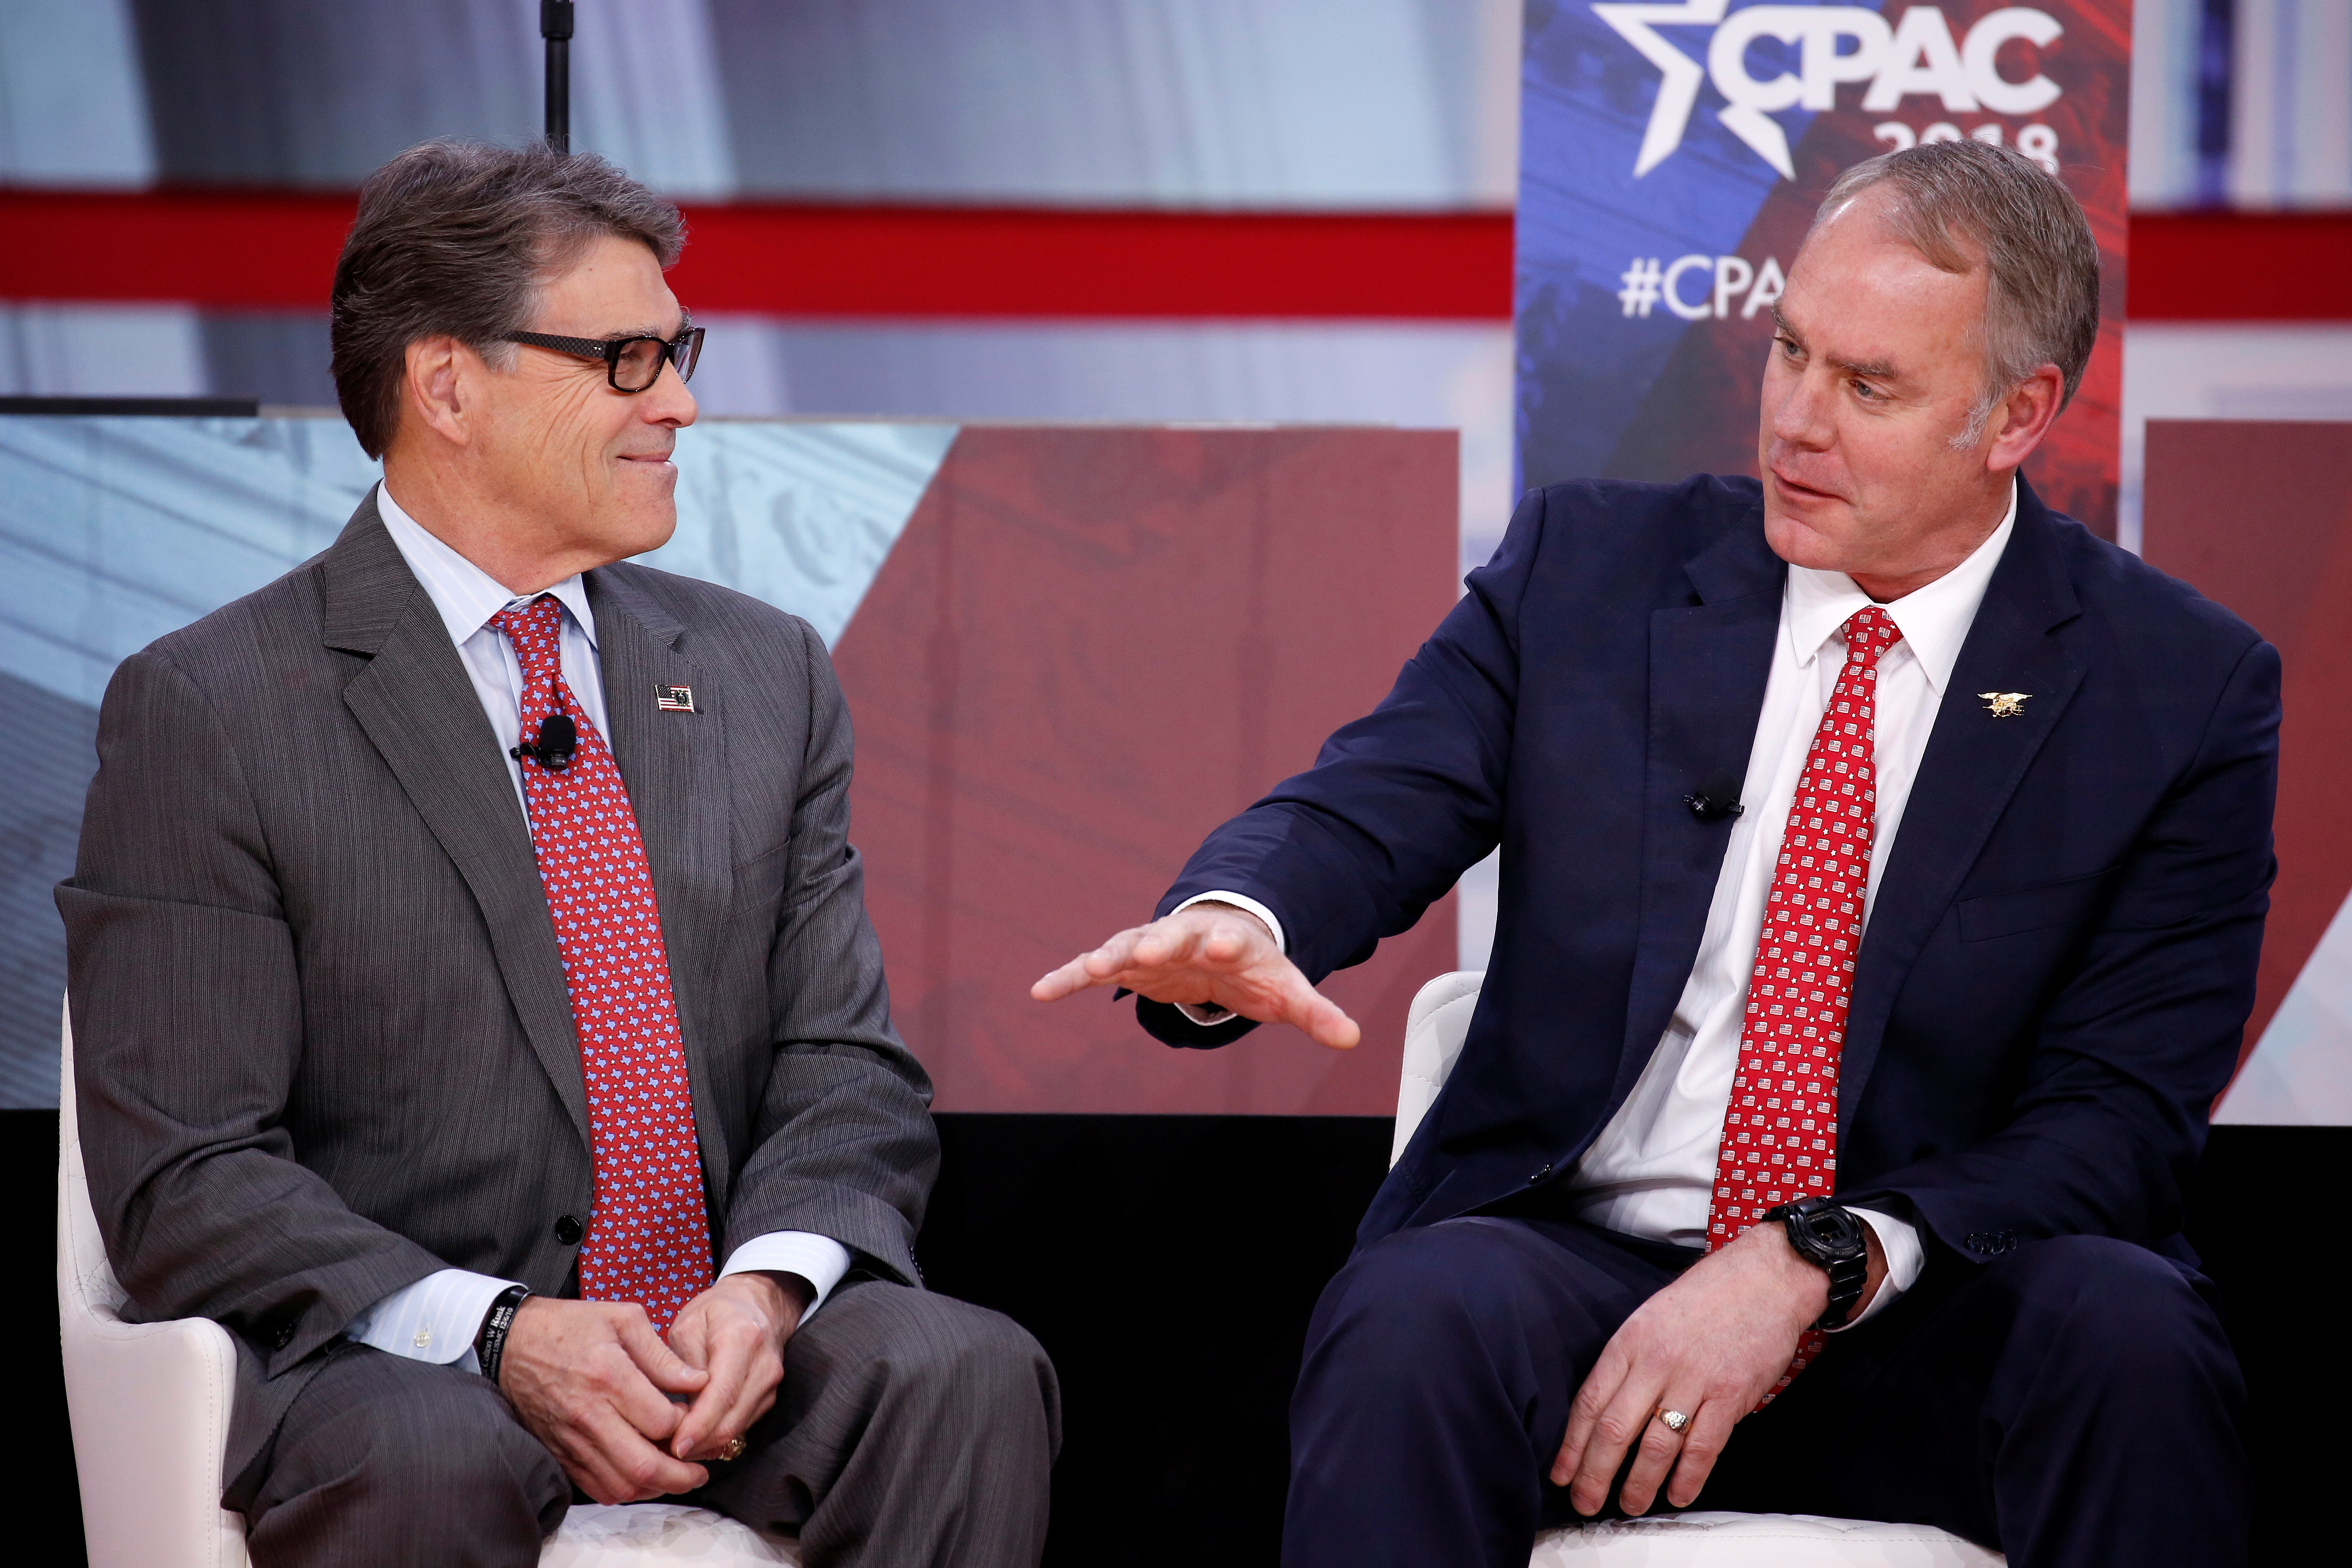 U.S. Secretary of Energy Rick Perry and U.S. Secretary of Interior Ryan Zinke speak at the Conservative Political Action Conference (CPAC) at National Harbor, Maryland